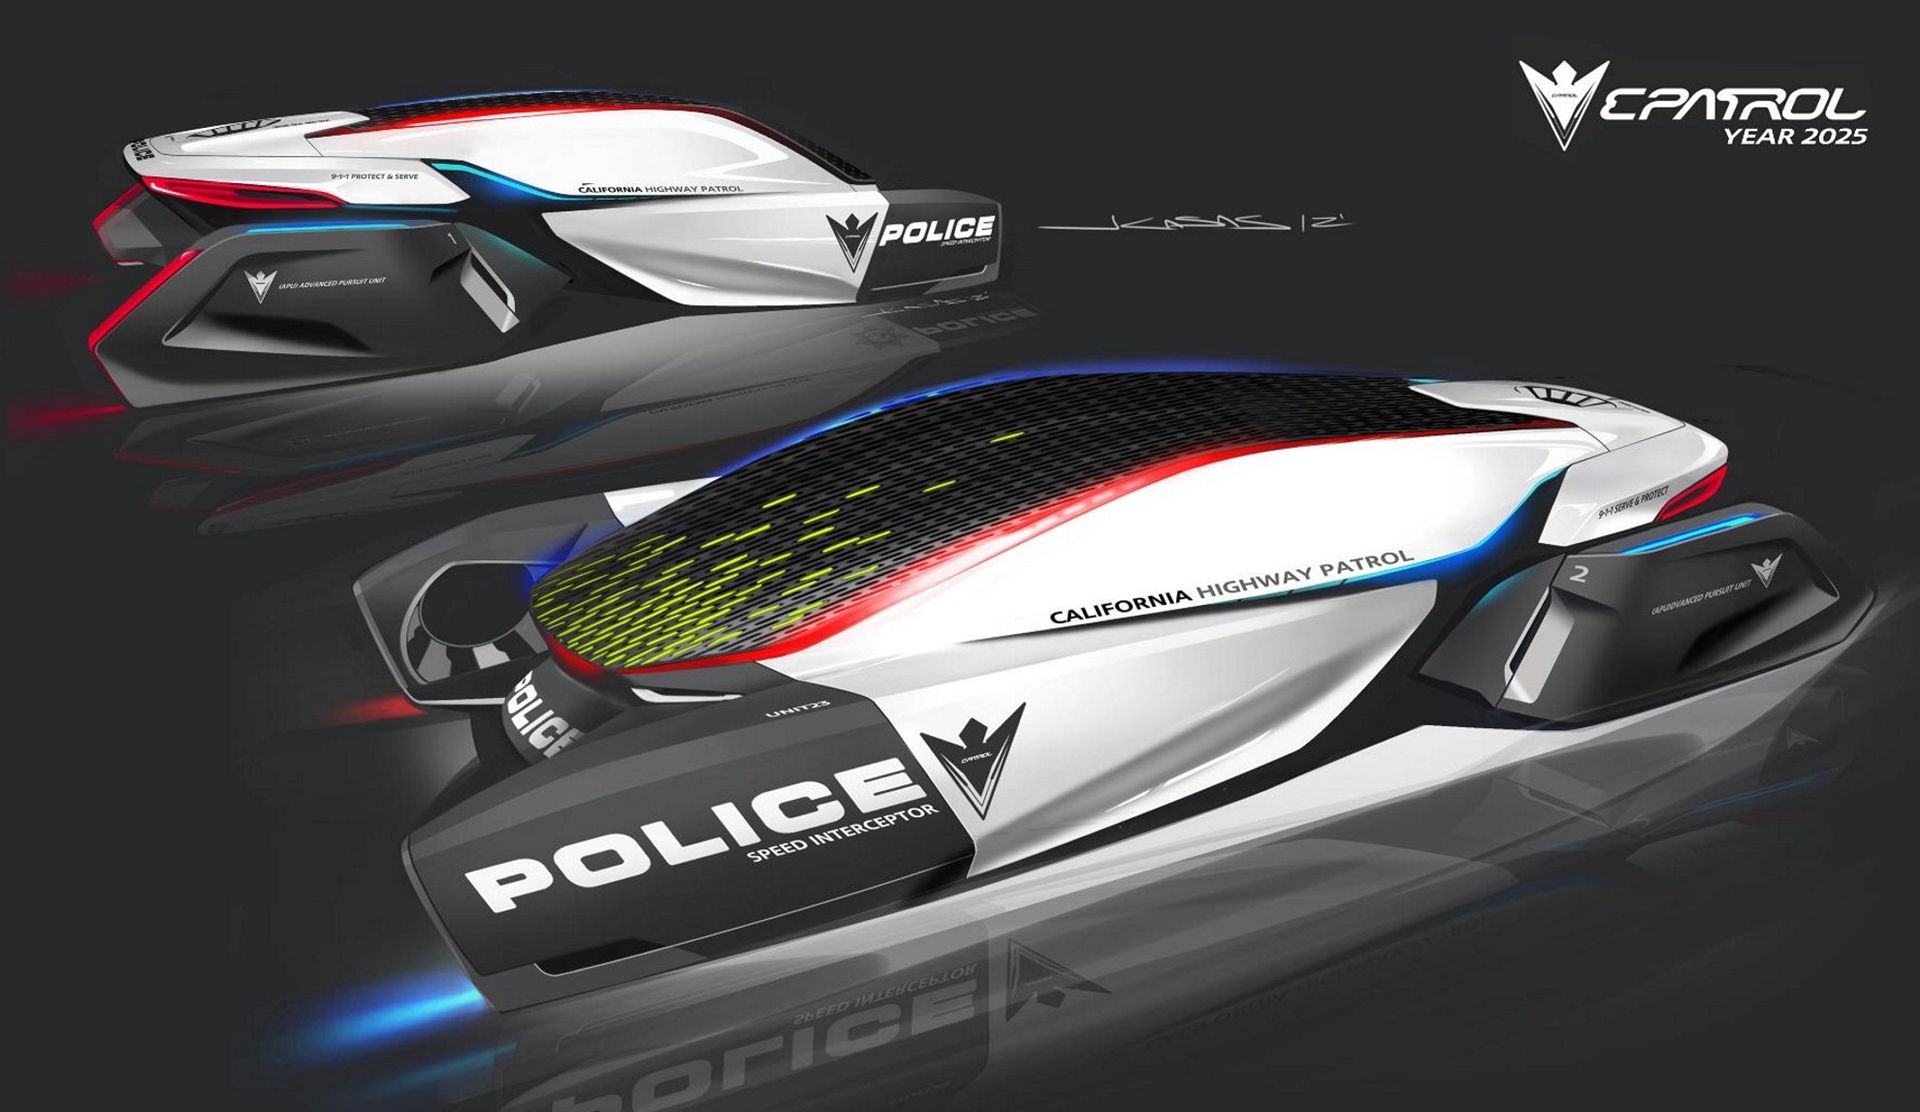 L.A. Autoshow – BMW GROUP DESIGNWORKSUSA SHOWS FUTURISTIC VISION OF POLICE VEHICLE OF THE YEAR 2025